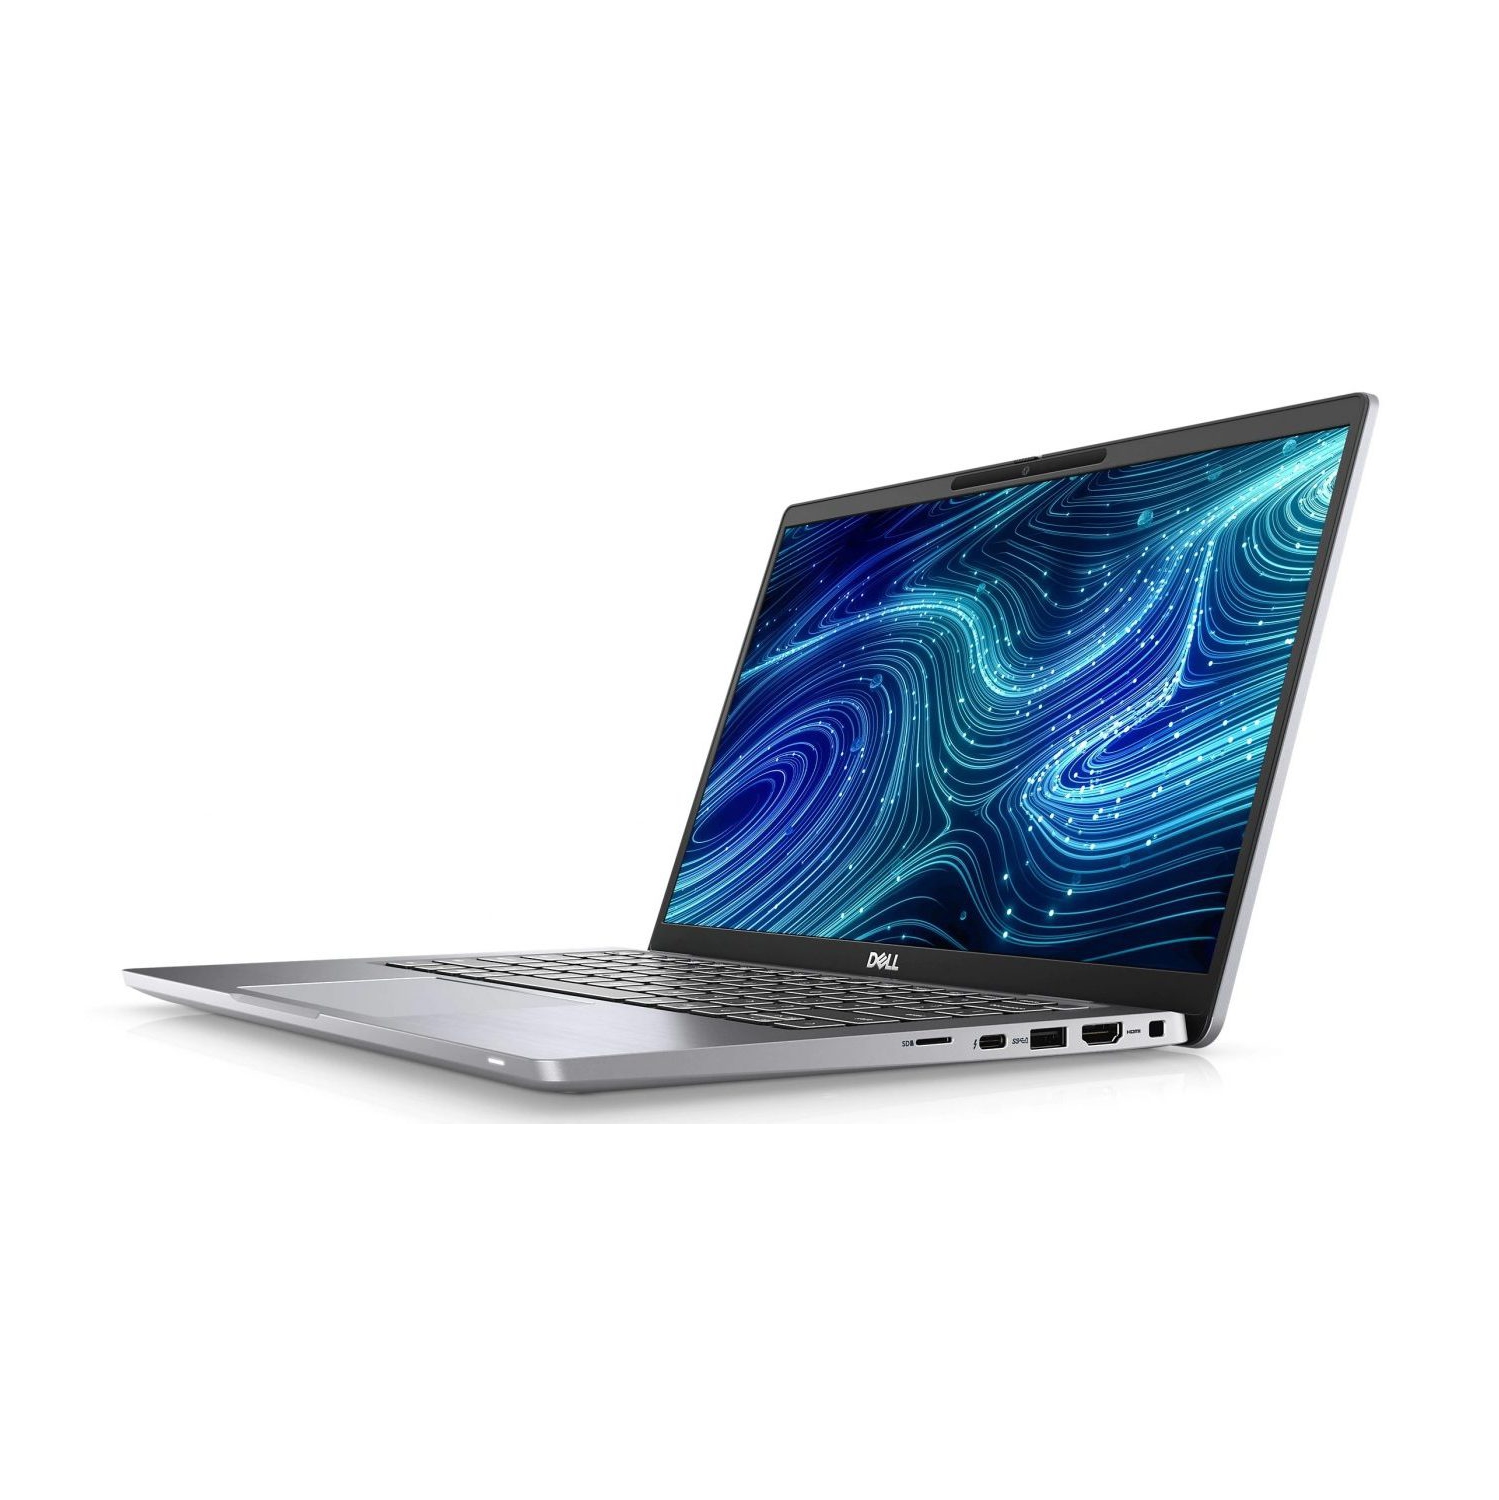 Refurbished (Excellent) - Dell Latitude 7000 7420 Laptop (2021) | 14" 4K | Core i7 - 512GB SSD - 16GB RAM | 4 Cores @ 4.4 GHz - 11th Gen CPU Certified Refurbished